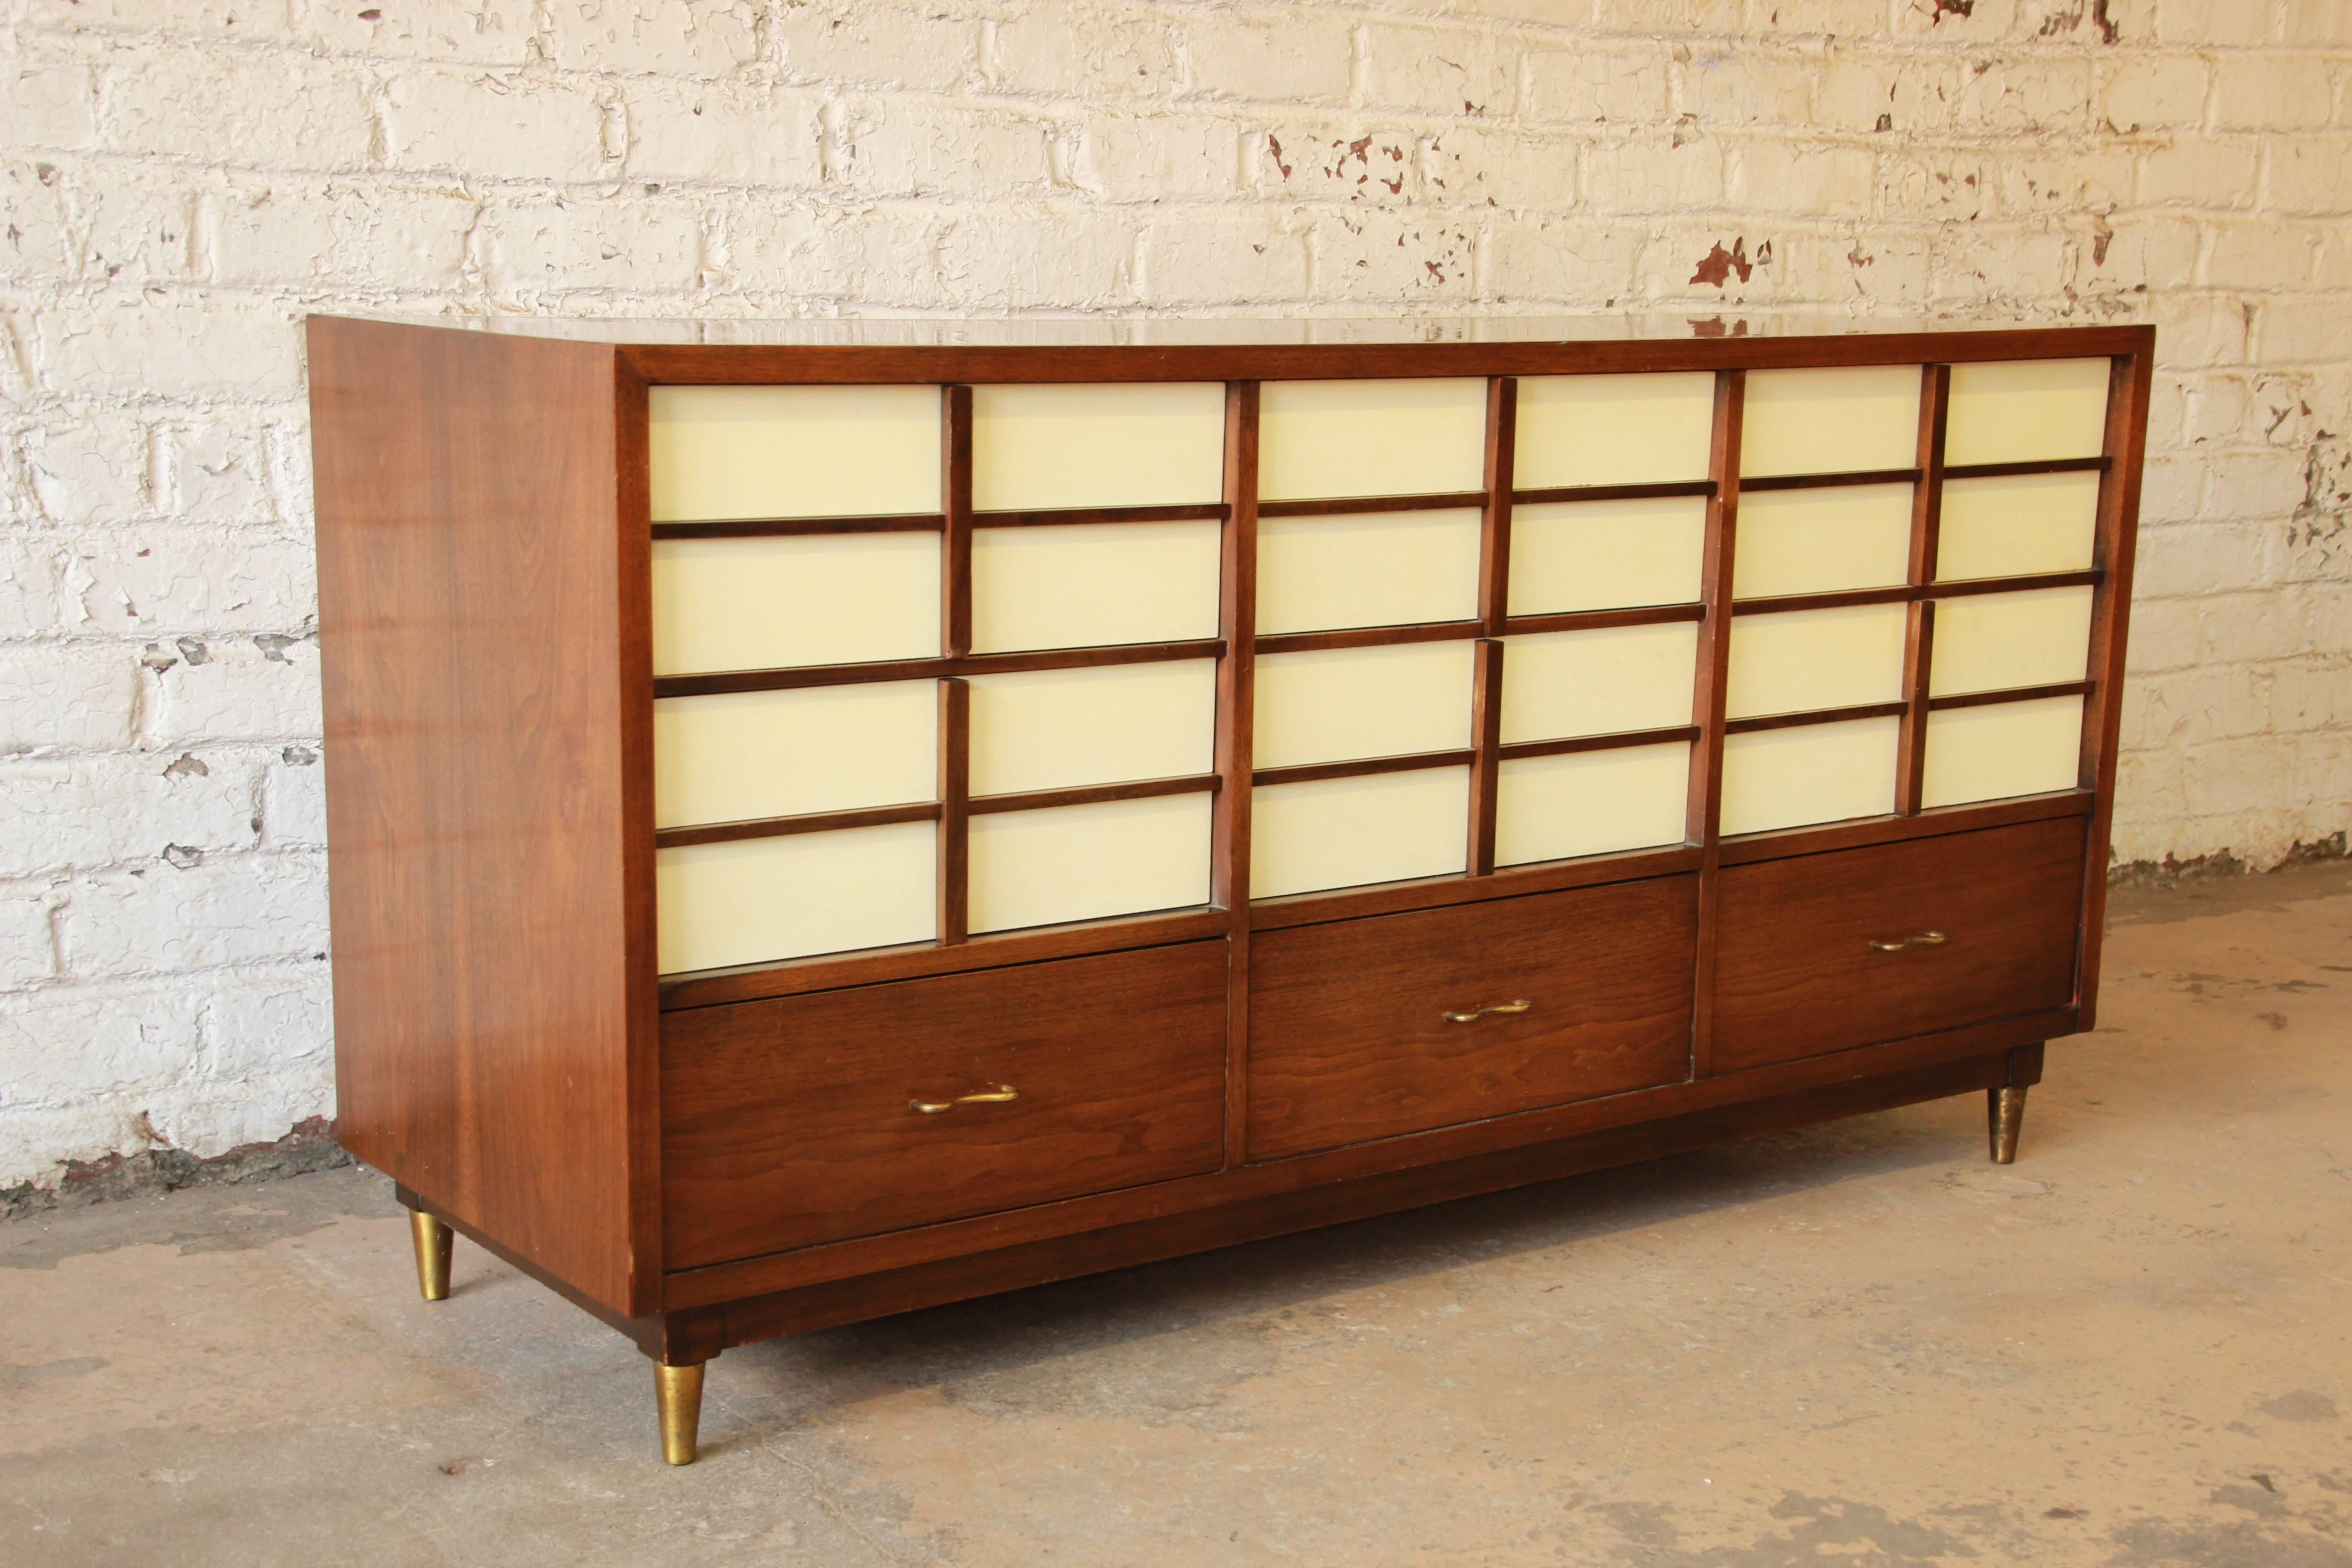 A beautiful Mid-Century Modern nine-drawer dresser or credenza designed by Merton Gershun for American of Martinsville. The dresser features sleek Mid-Century lines, gorgeous walnut wood grain, and a unique design, with white lacquered drawers. The